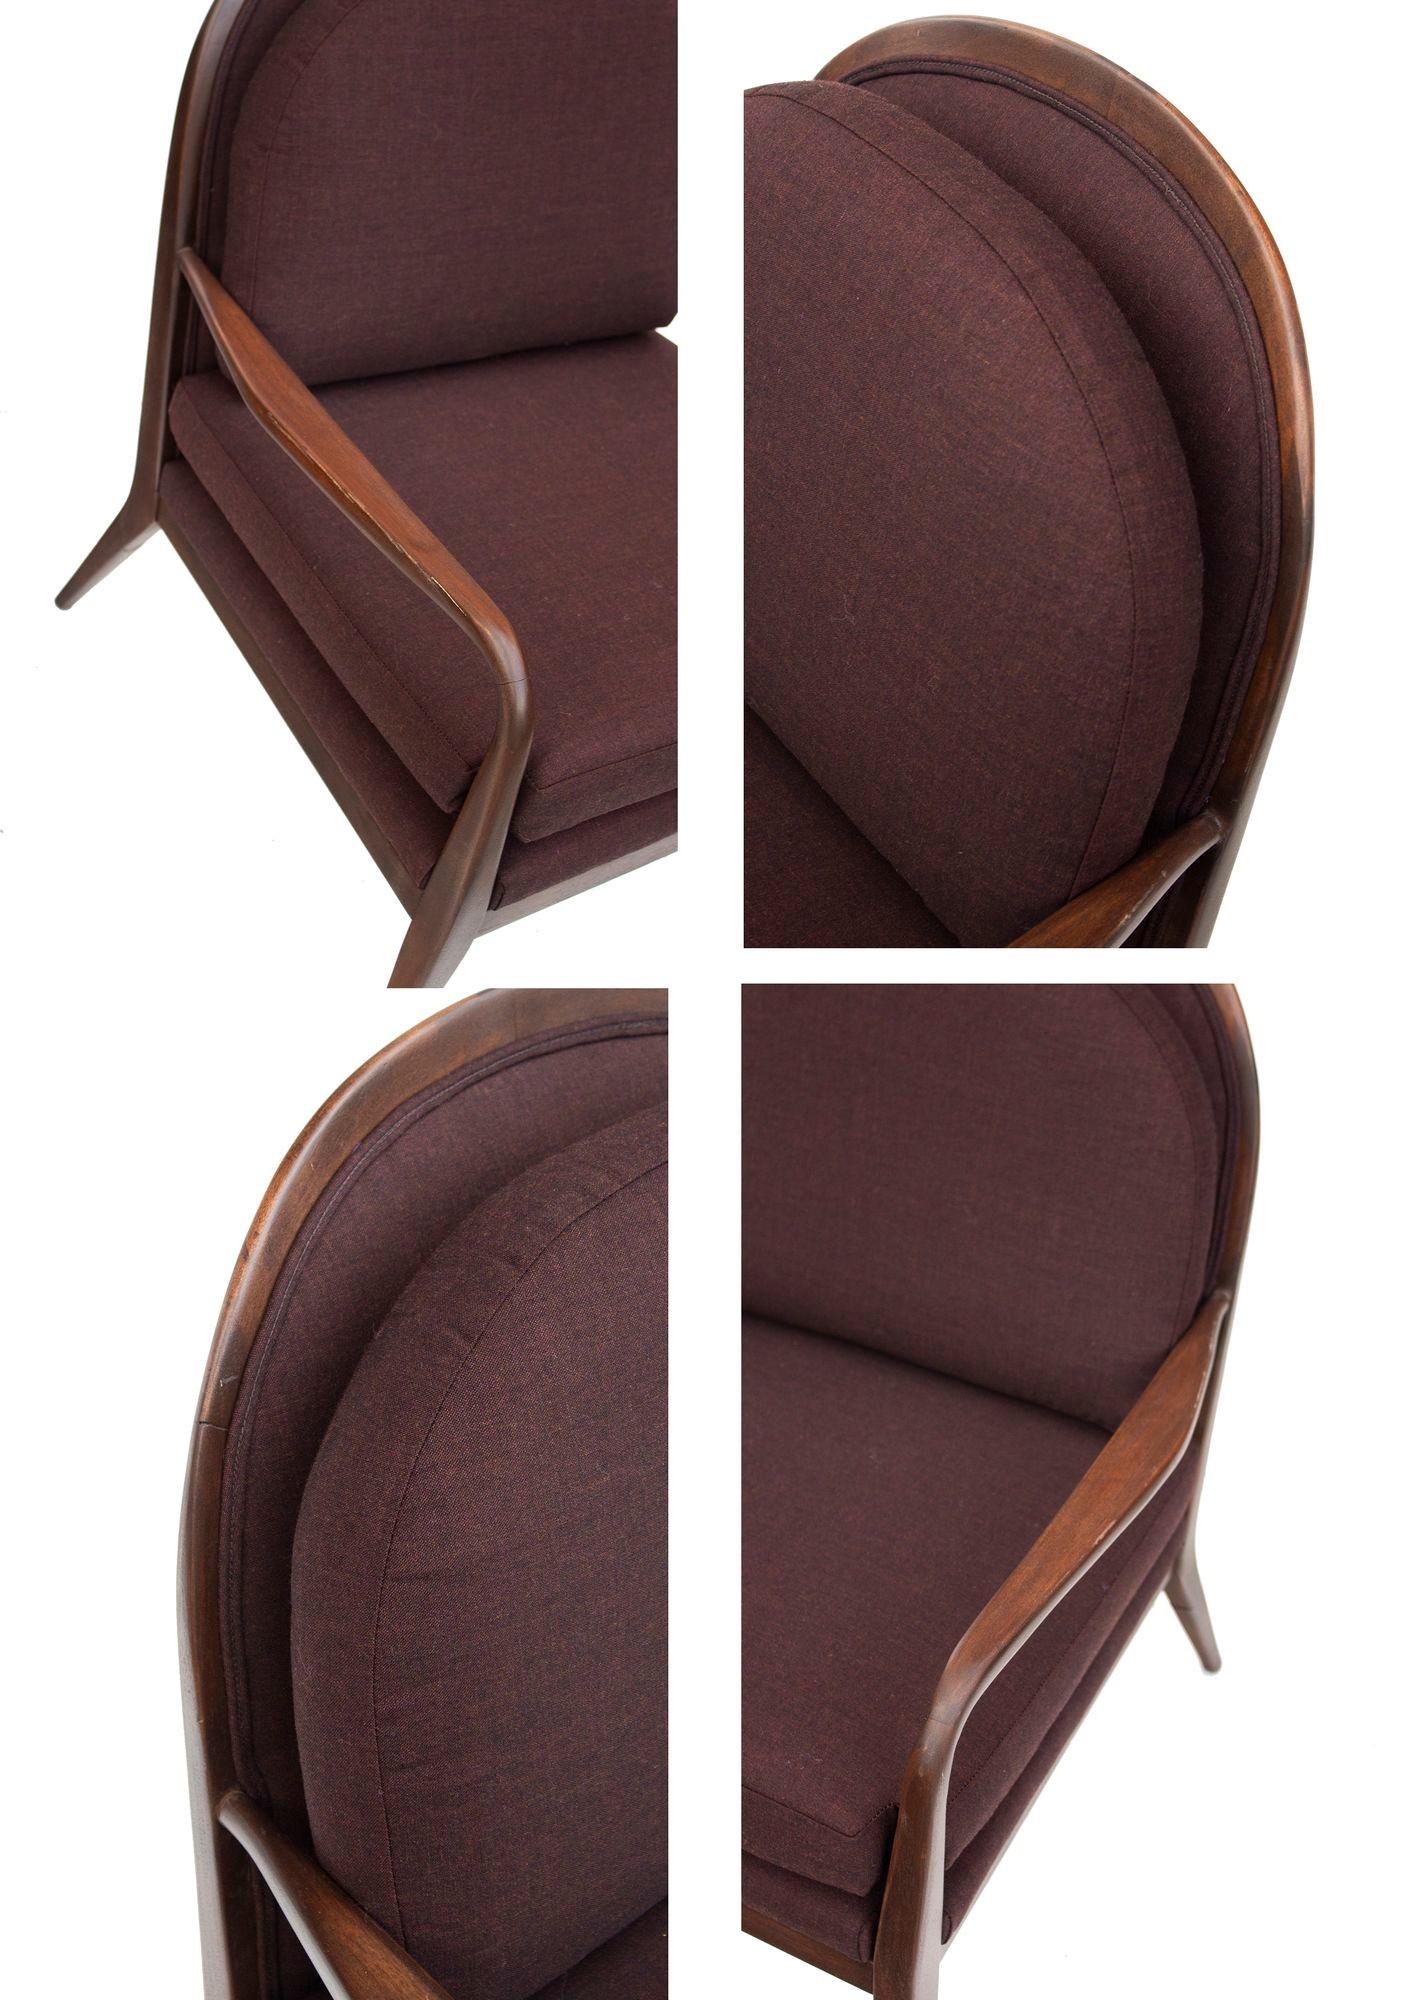 Paul McCobb for Widdicomb Walnut Armchairs, Newly upholstered For Sale 1